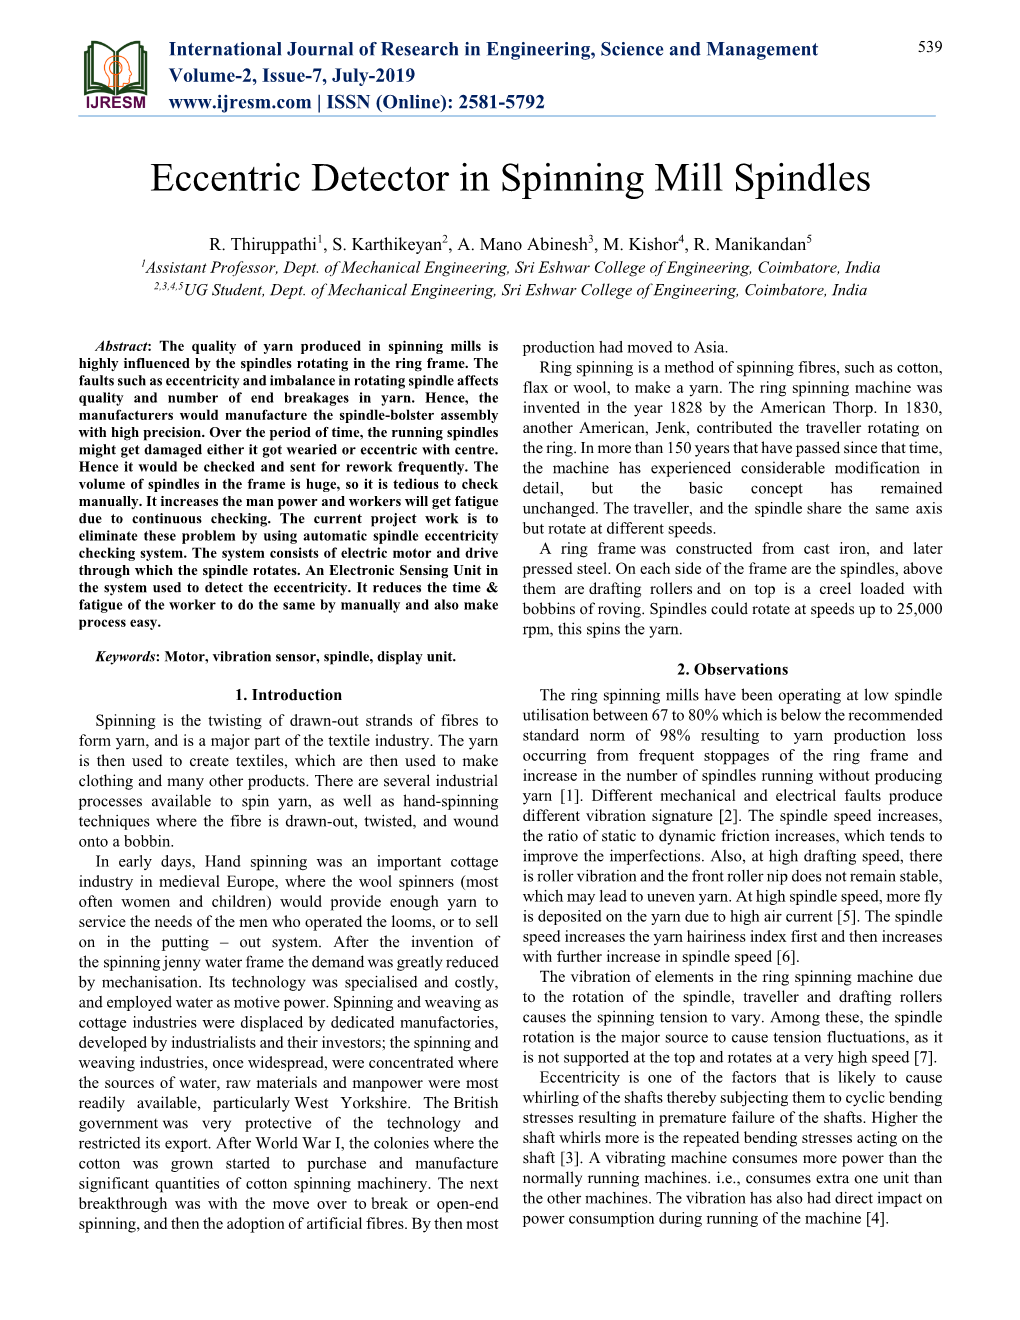 Eccentric Detector in Spinning Mill Spindles